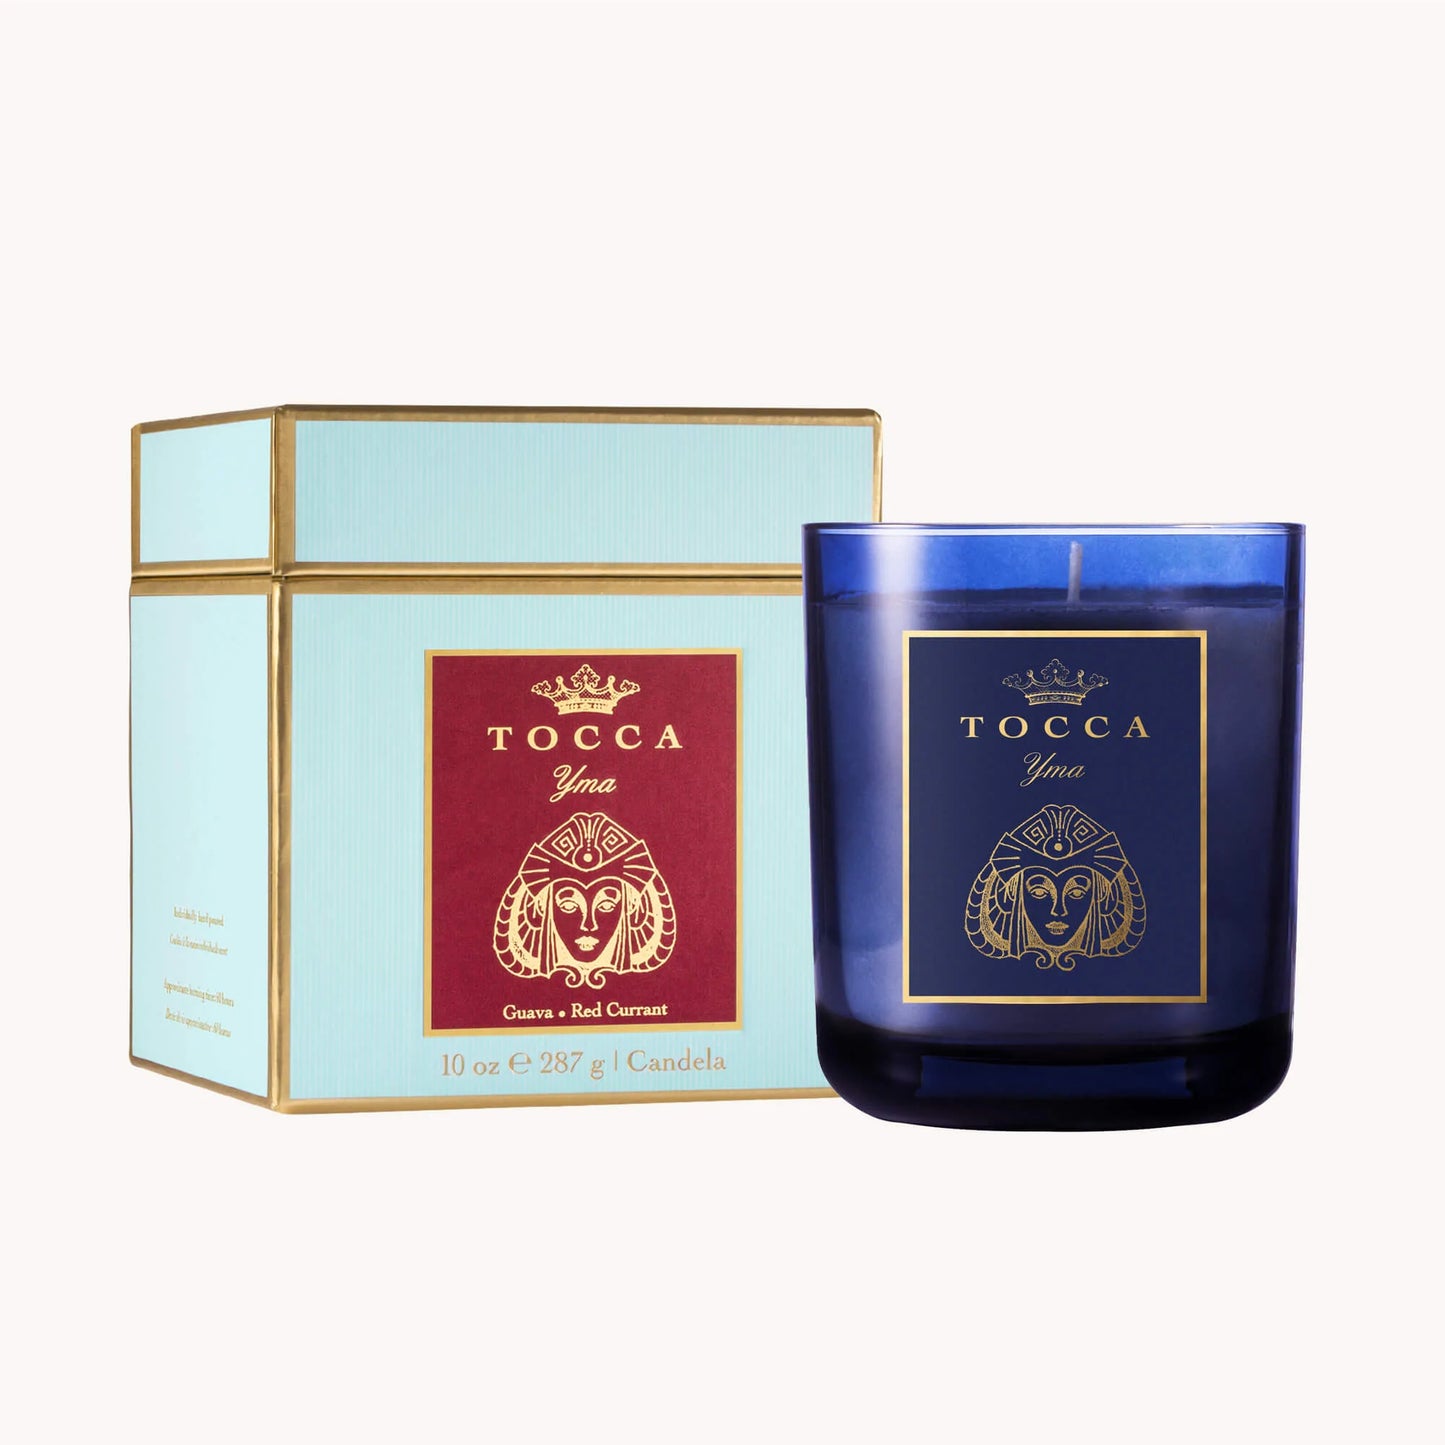 Classica Yma Candle